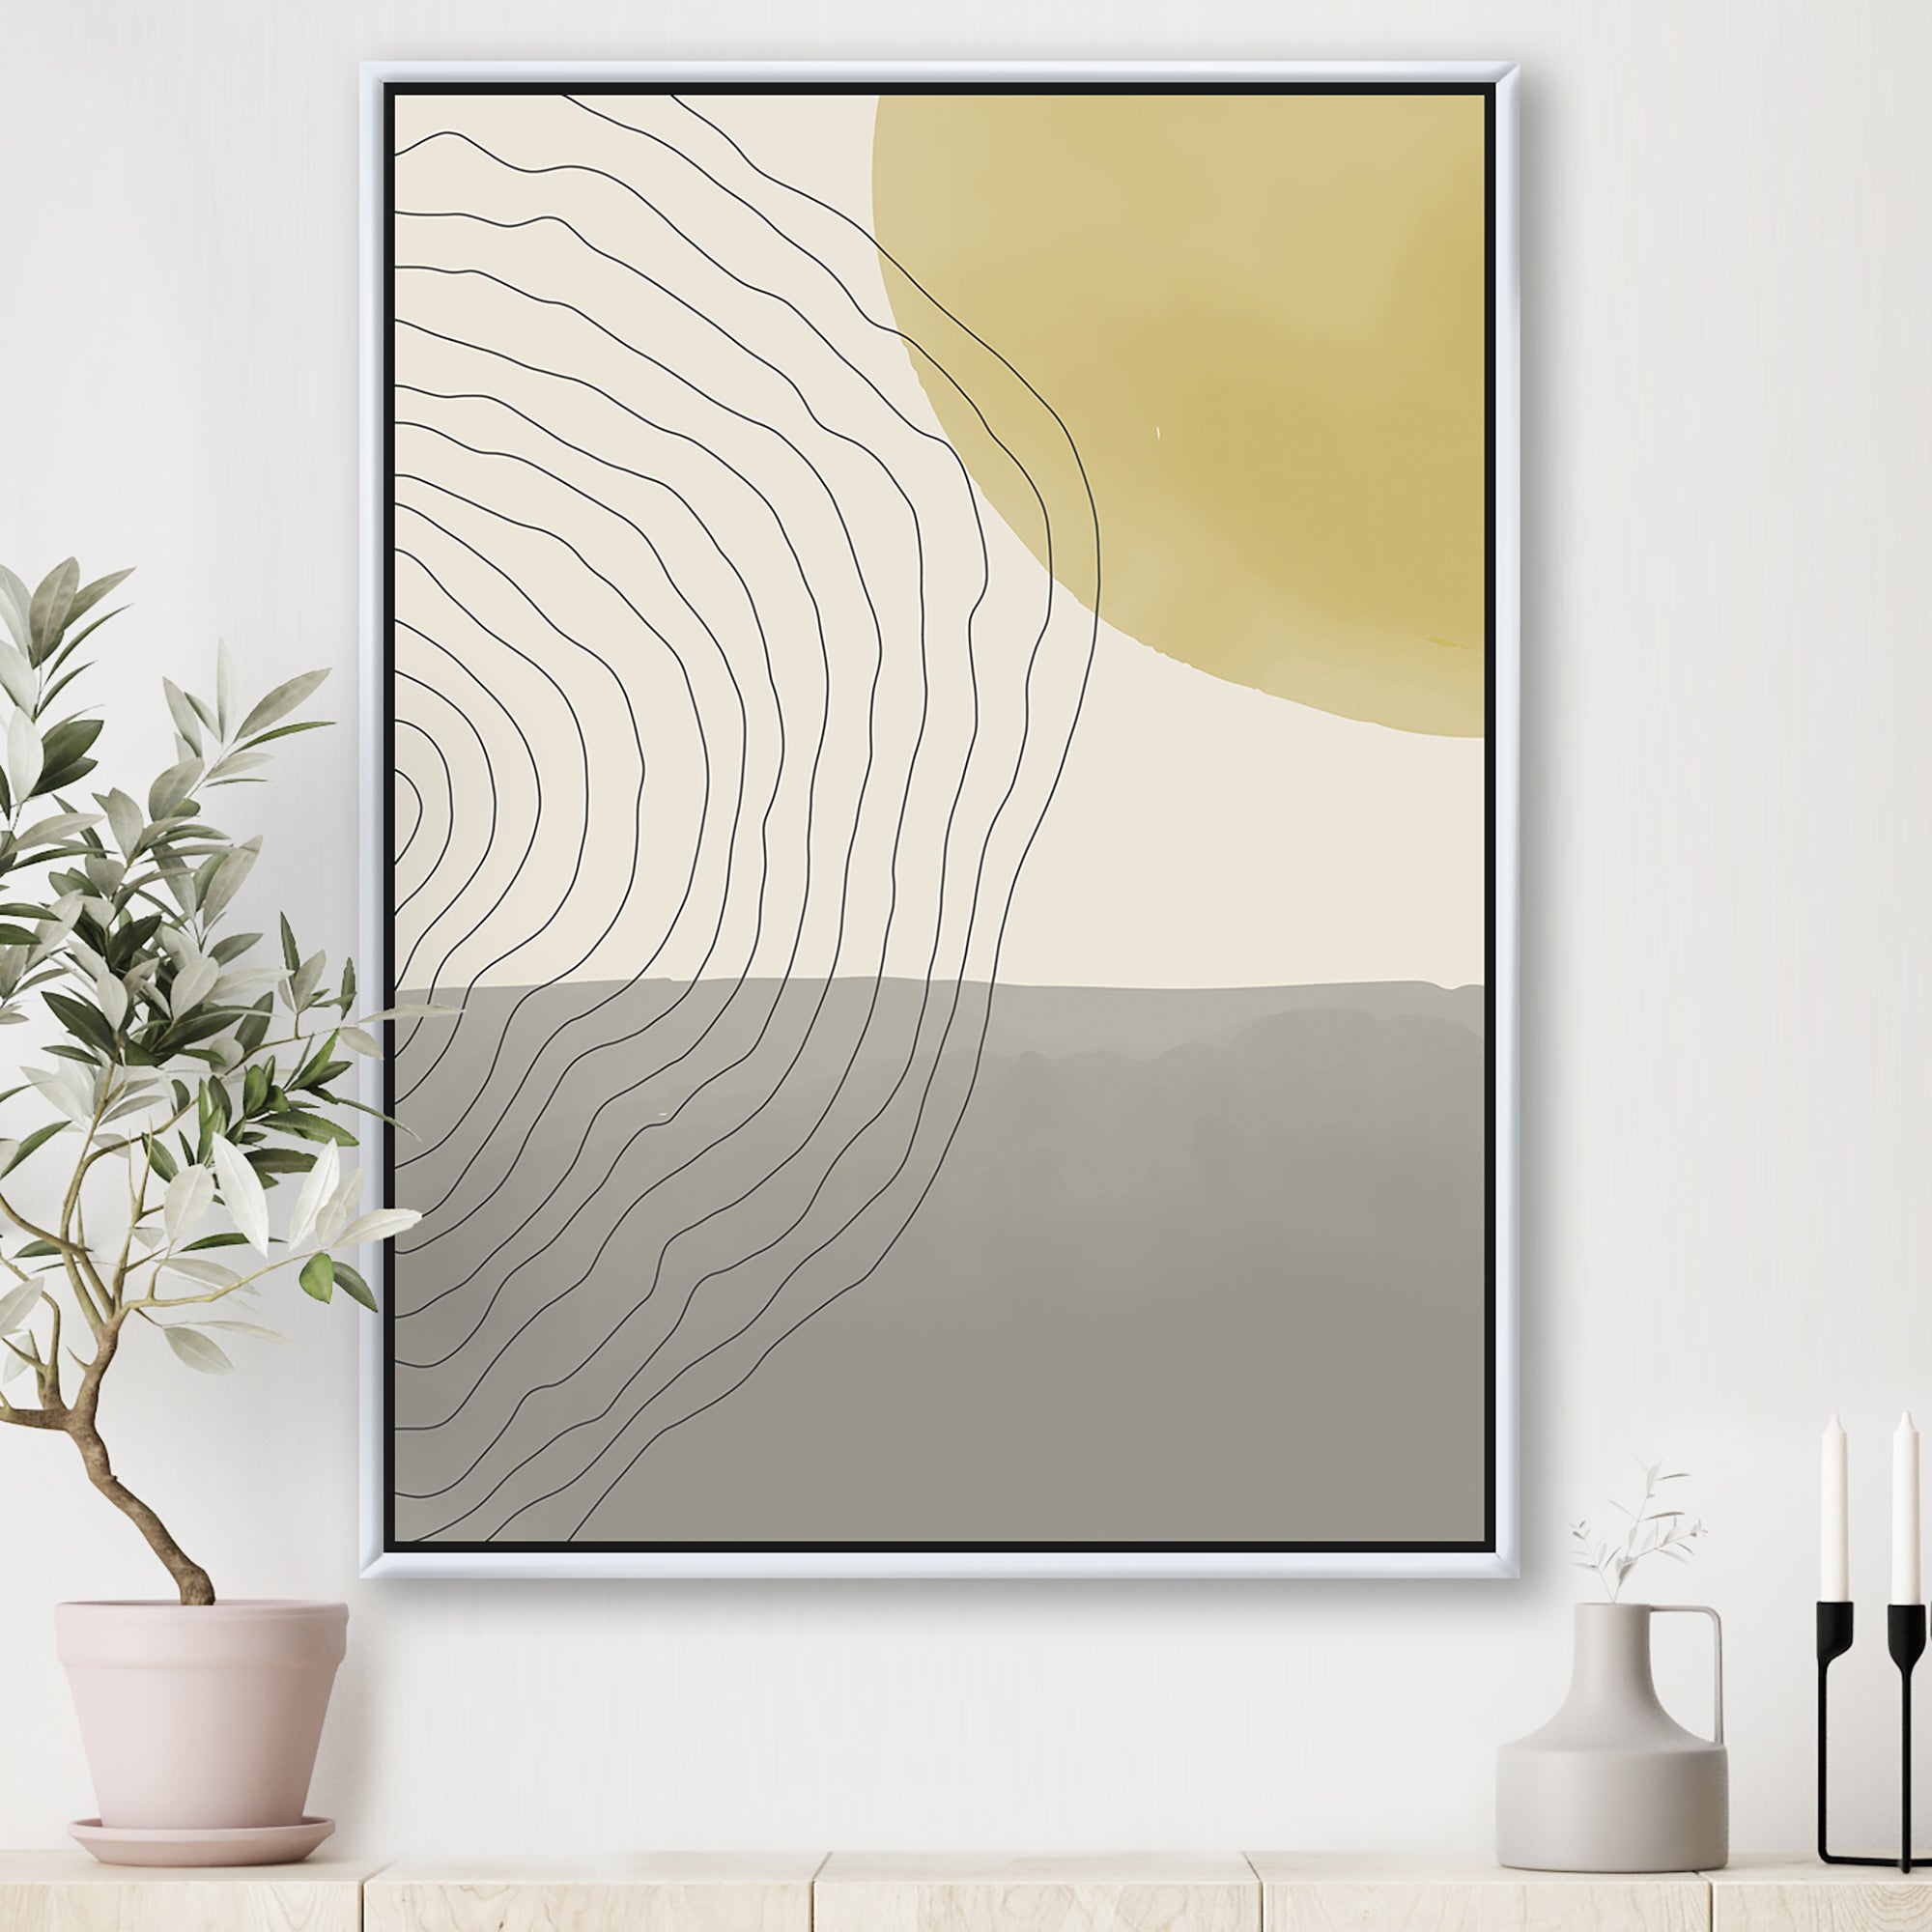 Minimal Geometric Compostions Of Elementary Forms XXXIV Wall Art